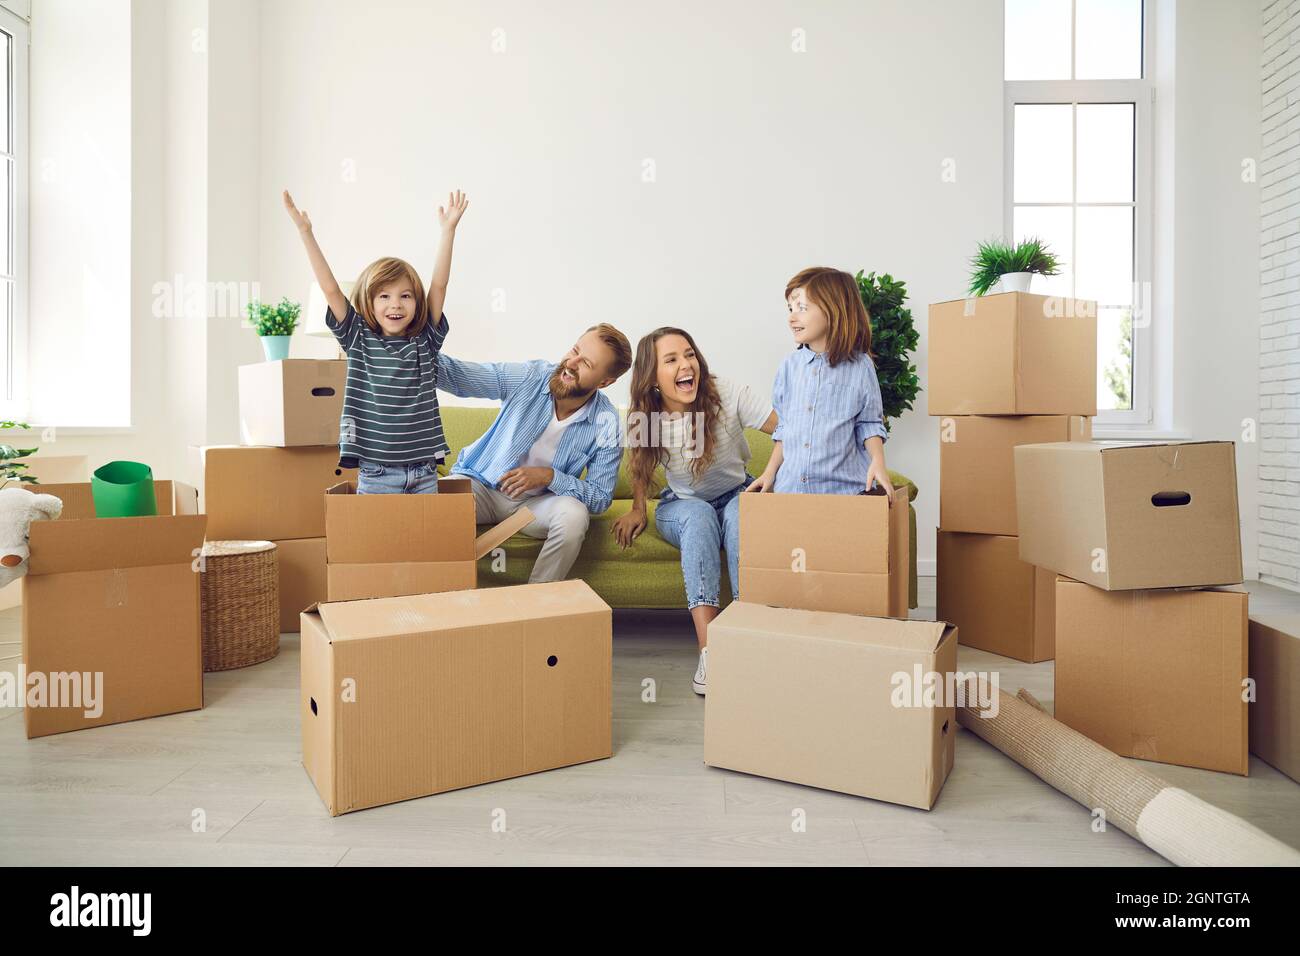 Happy young family playing with cardboard boxes and having fun in their new home Stock Photo